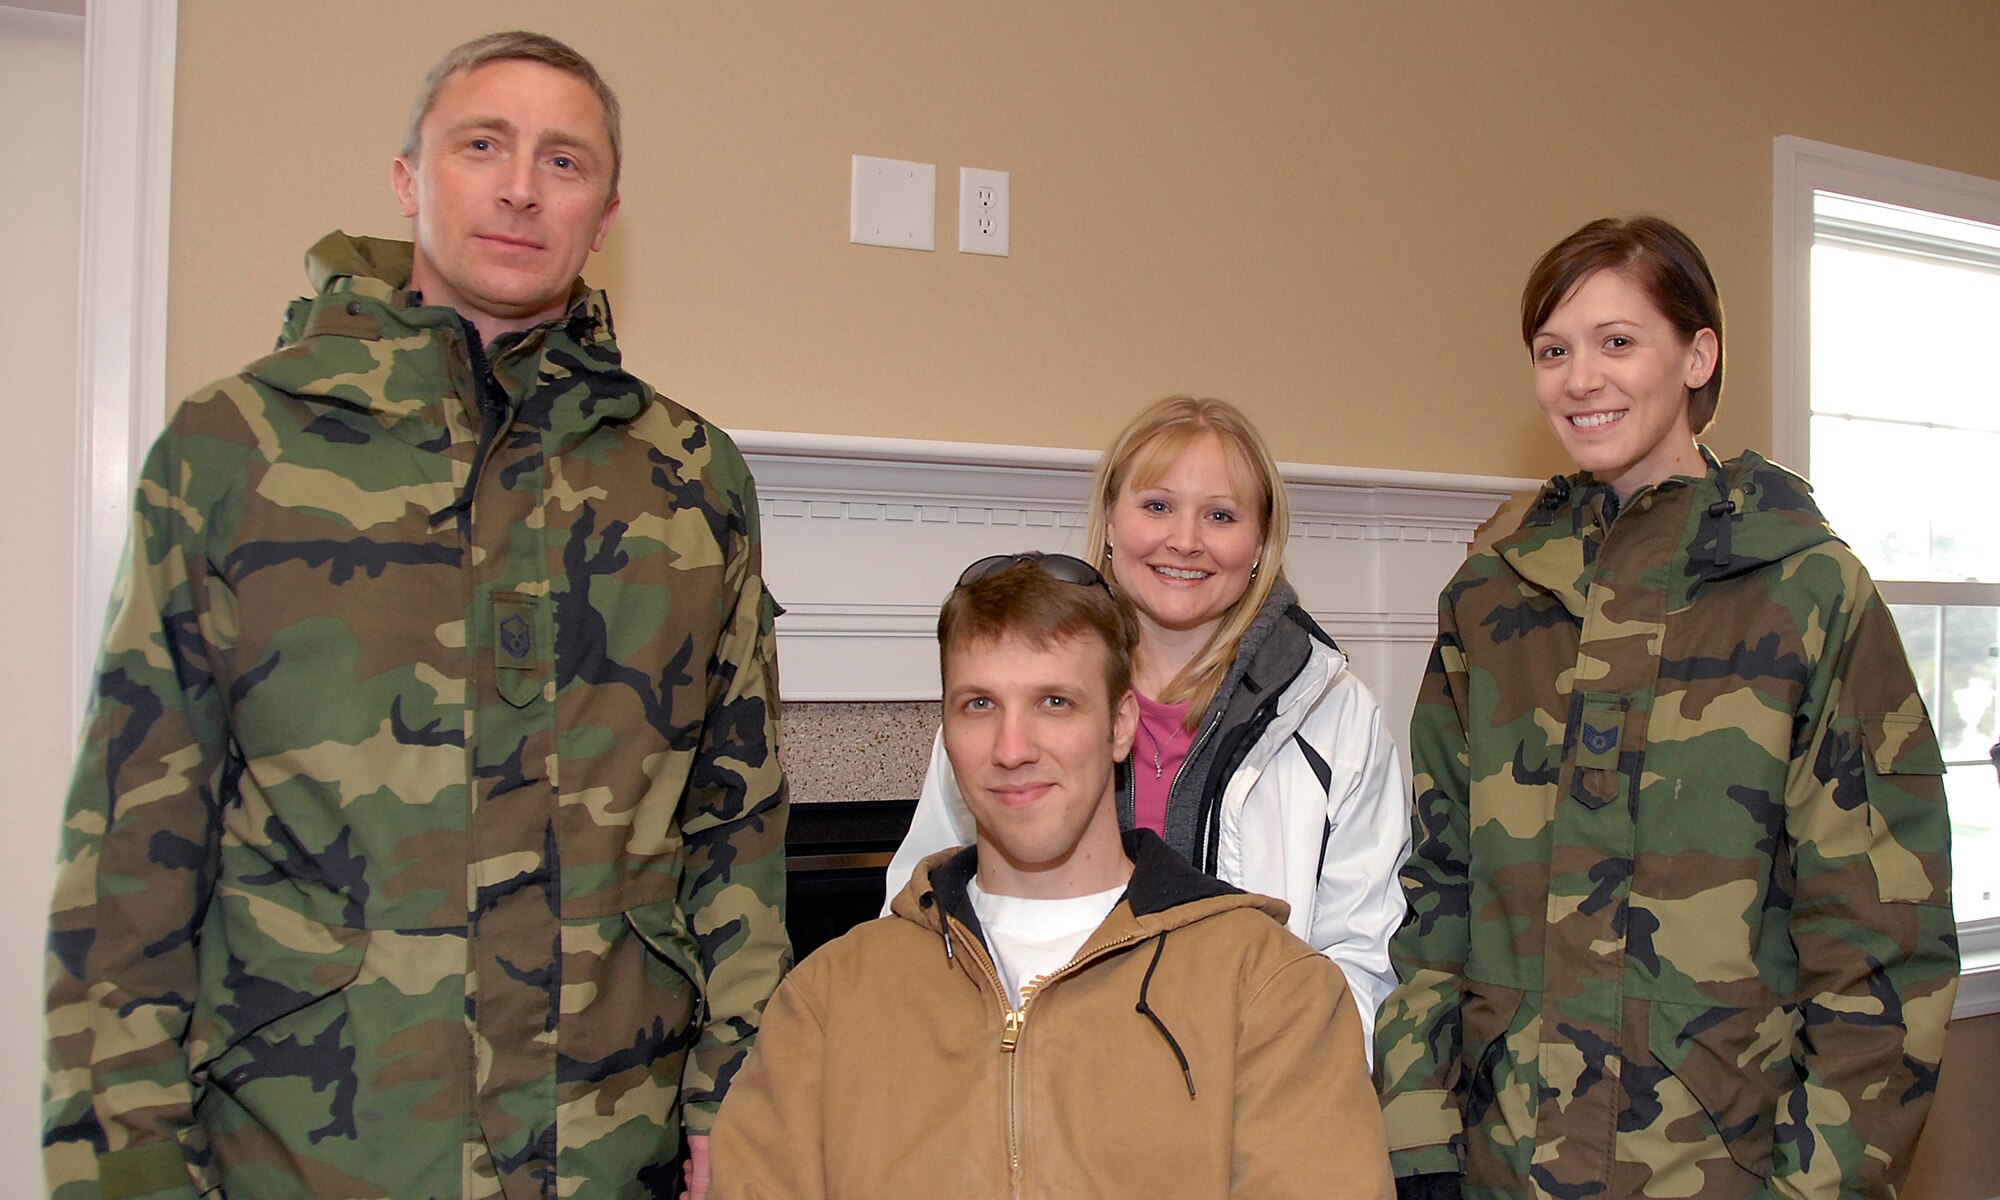 Master Sgt. Kevin Sandberg and Tech. Sgt. Jamie Eastlick,115th Fighter Wing, stand with injured Army veteran Staff Sgt. Charles Isaacson and his wife, Brenda, following a key presentation, inside a newly built Homes for Our Troops home. More than 10 Airmen from the 115 FW contributed to the home, located in Sun Prairie, during a three-day build brigade. The home features many of the special accomodations that Sergeant Isaacson needs to accomodate his injuries from the War on Terror. (U.S. Air Force Photo by Master Sgt. Dan Richardson)